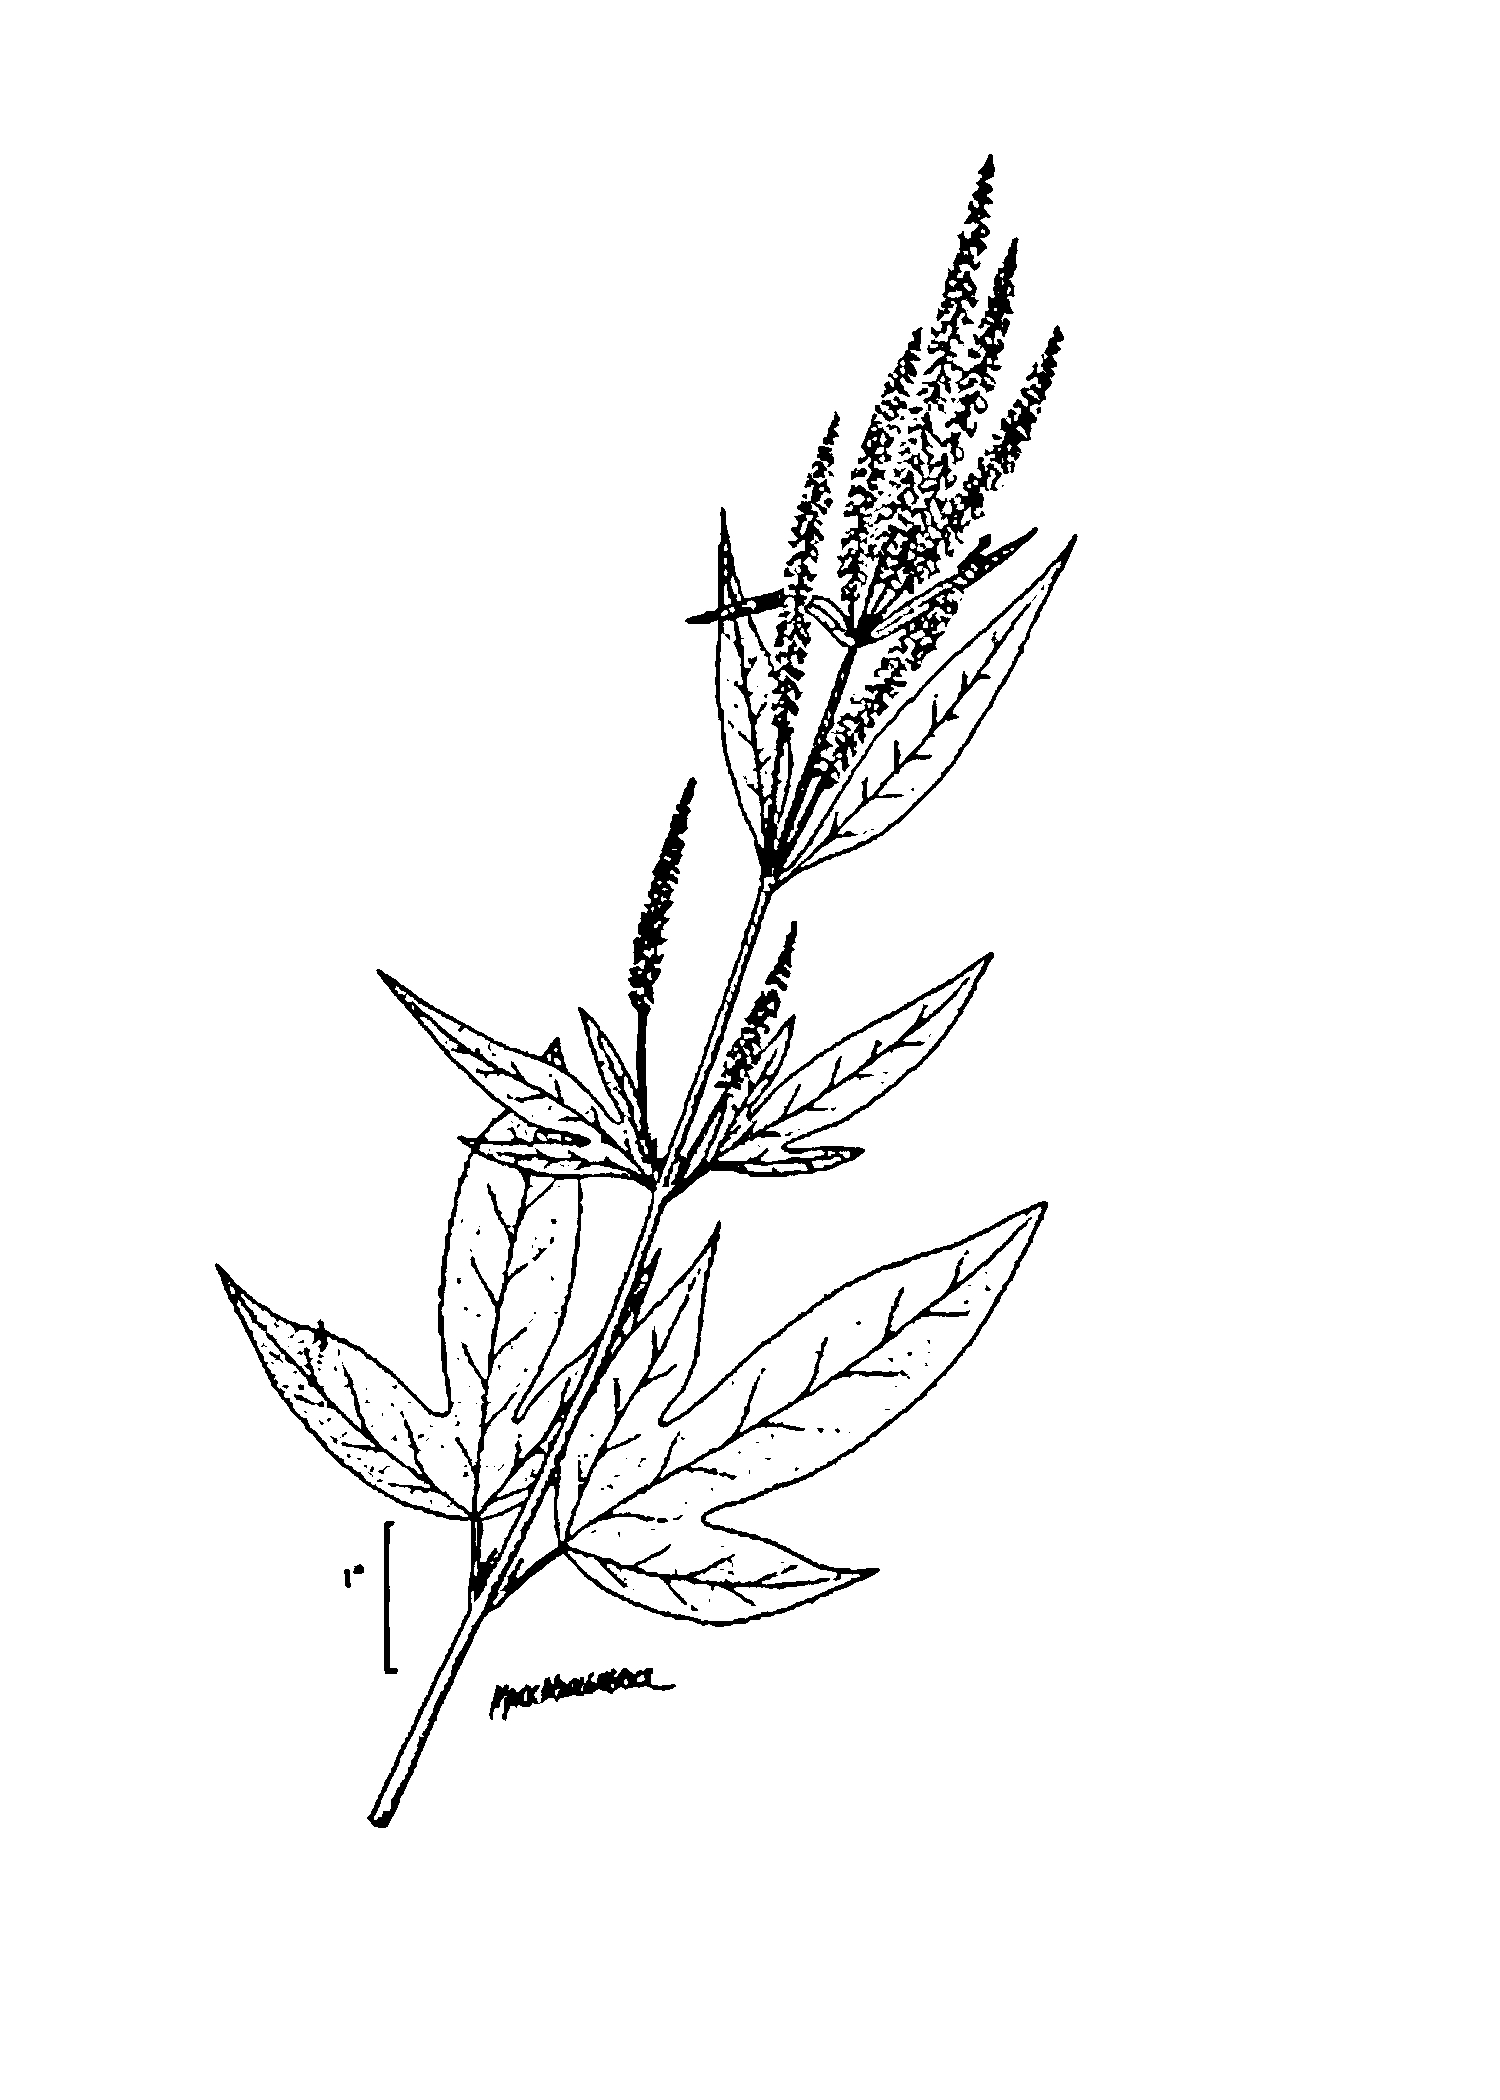 Giant Ragweed line drawing from USDA  NRCS, Wetland flora: Field office illustrated guide to plant species.